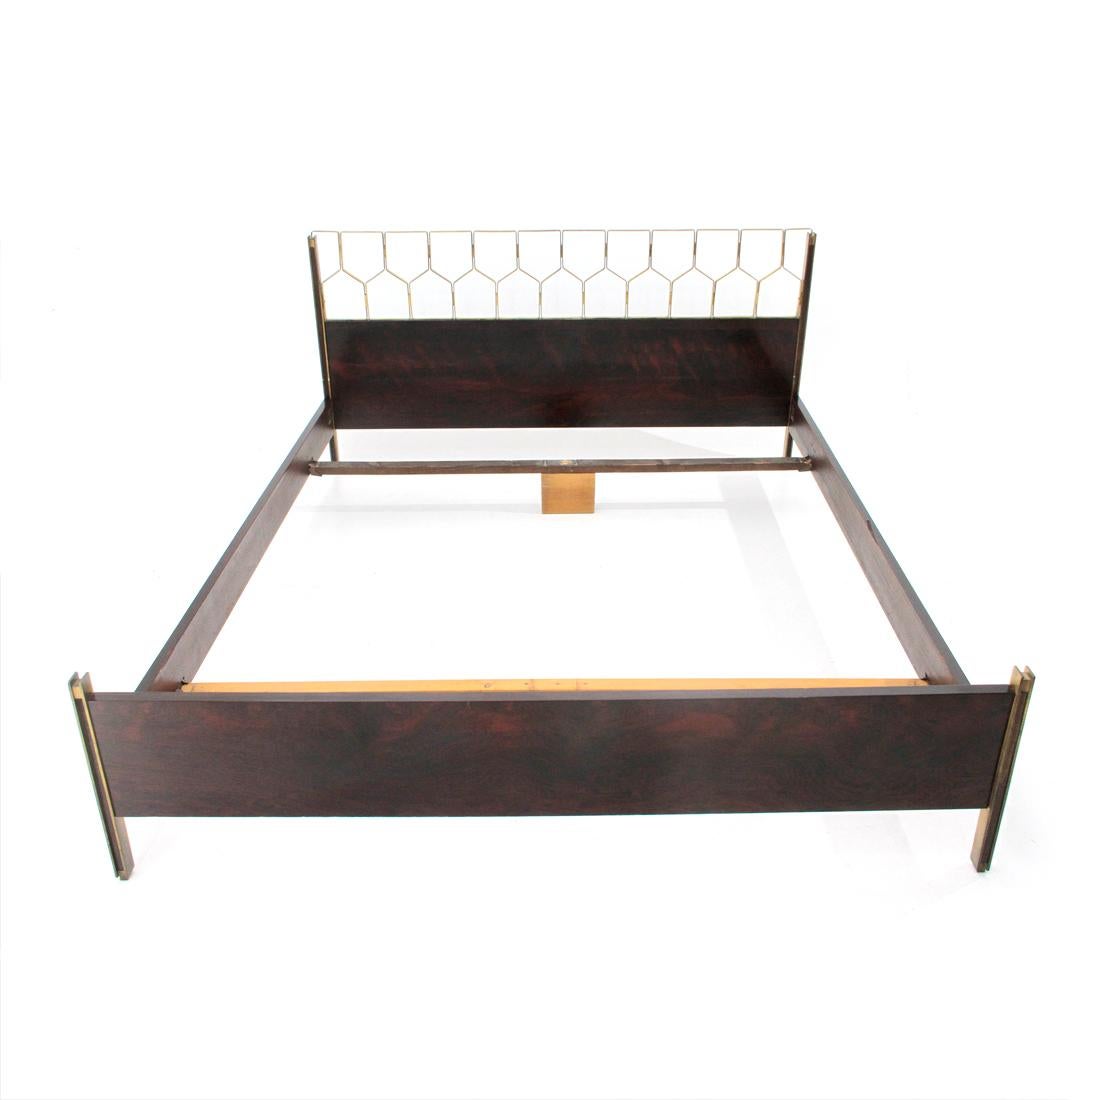 Bed produced by Sormani in the 1960s, designed by Gianni Songia.
Frosted brass structure and veneered wood.
Frosted brass headboard.
Good general conditions, some signs due to normal use over time, veneer raised in some points.
Houses a 195x160